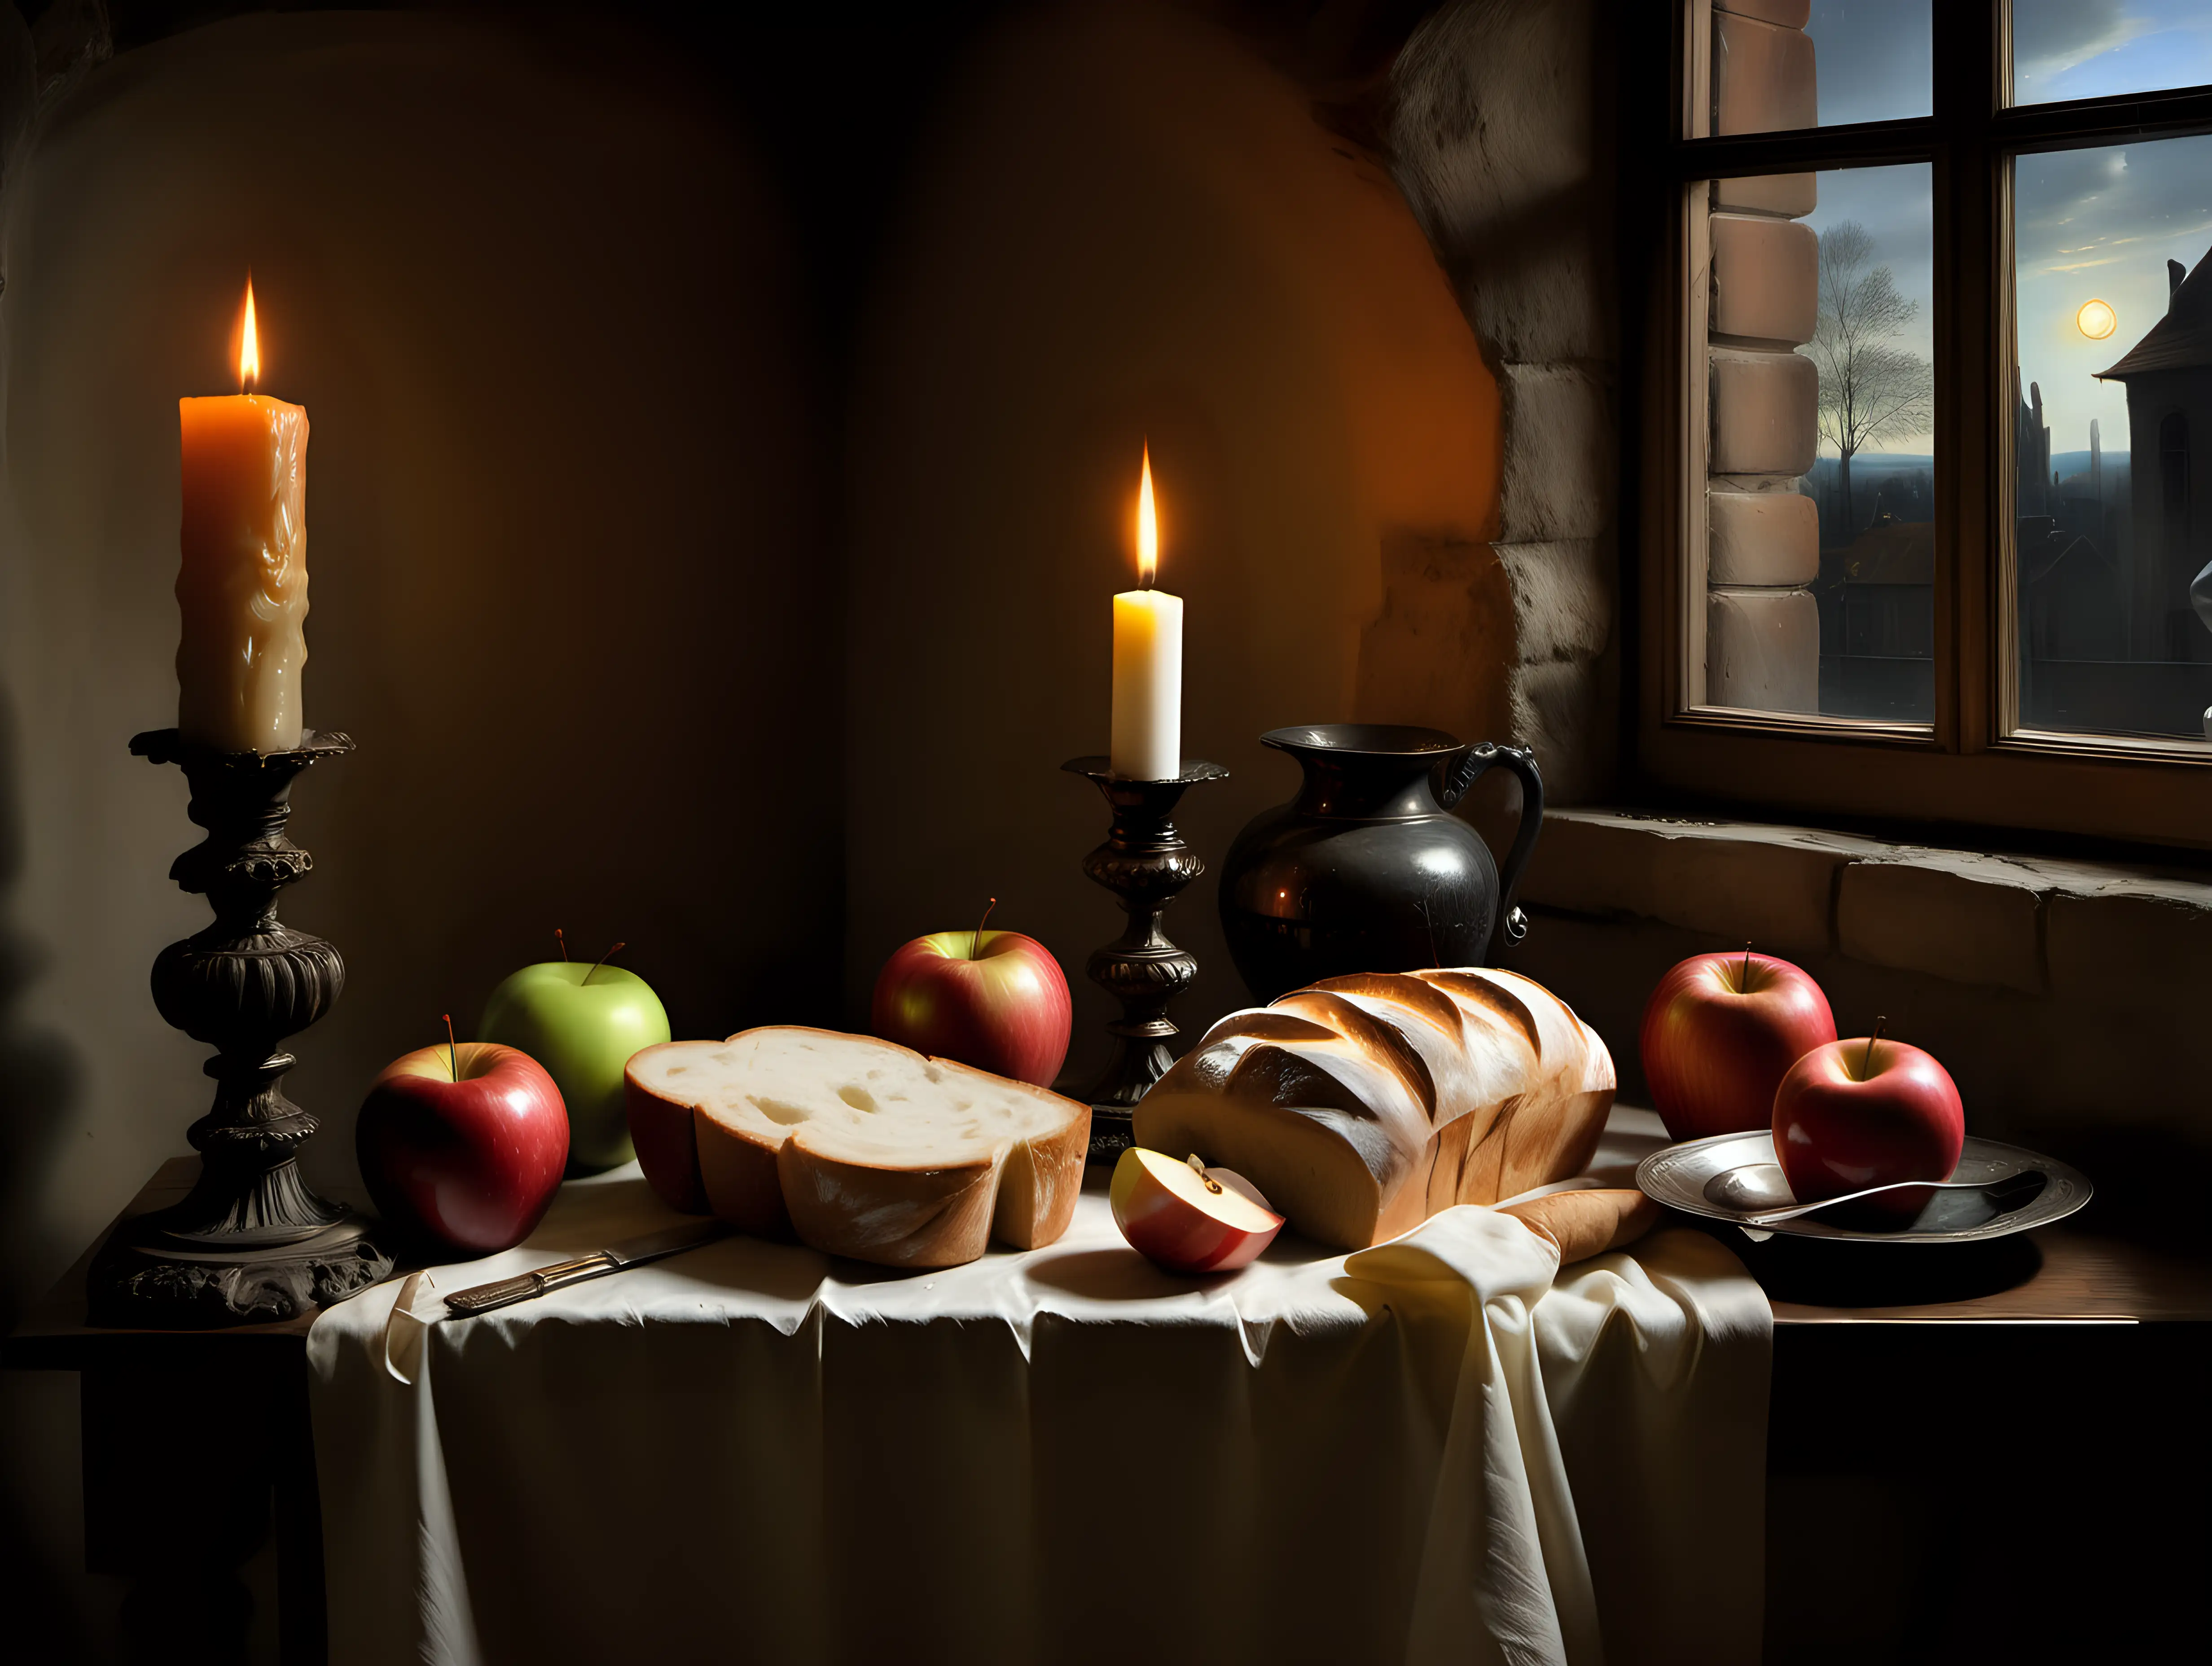 Classic Still Life 17th Century Wet Oil Painting with Bread Candle and Apple in Rembrandt Style